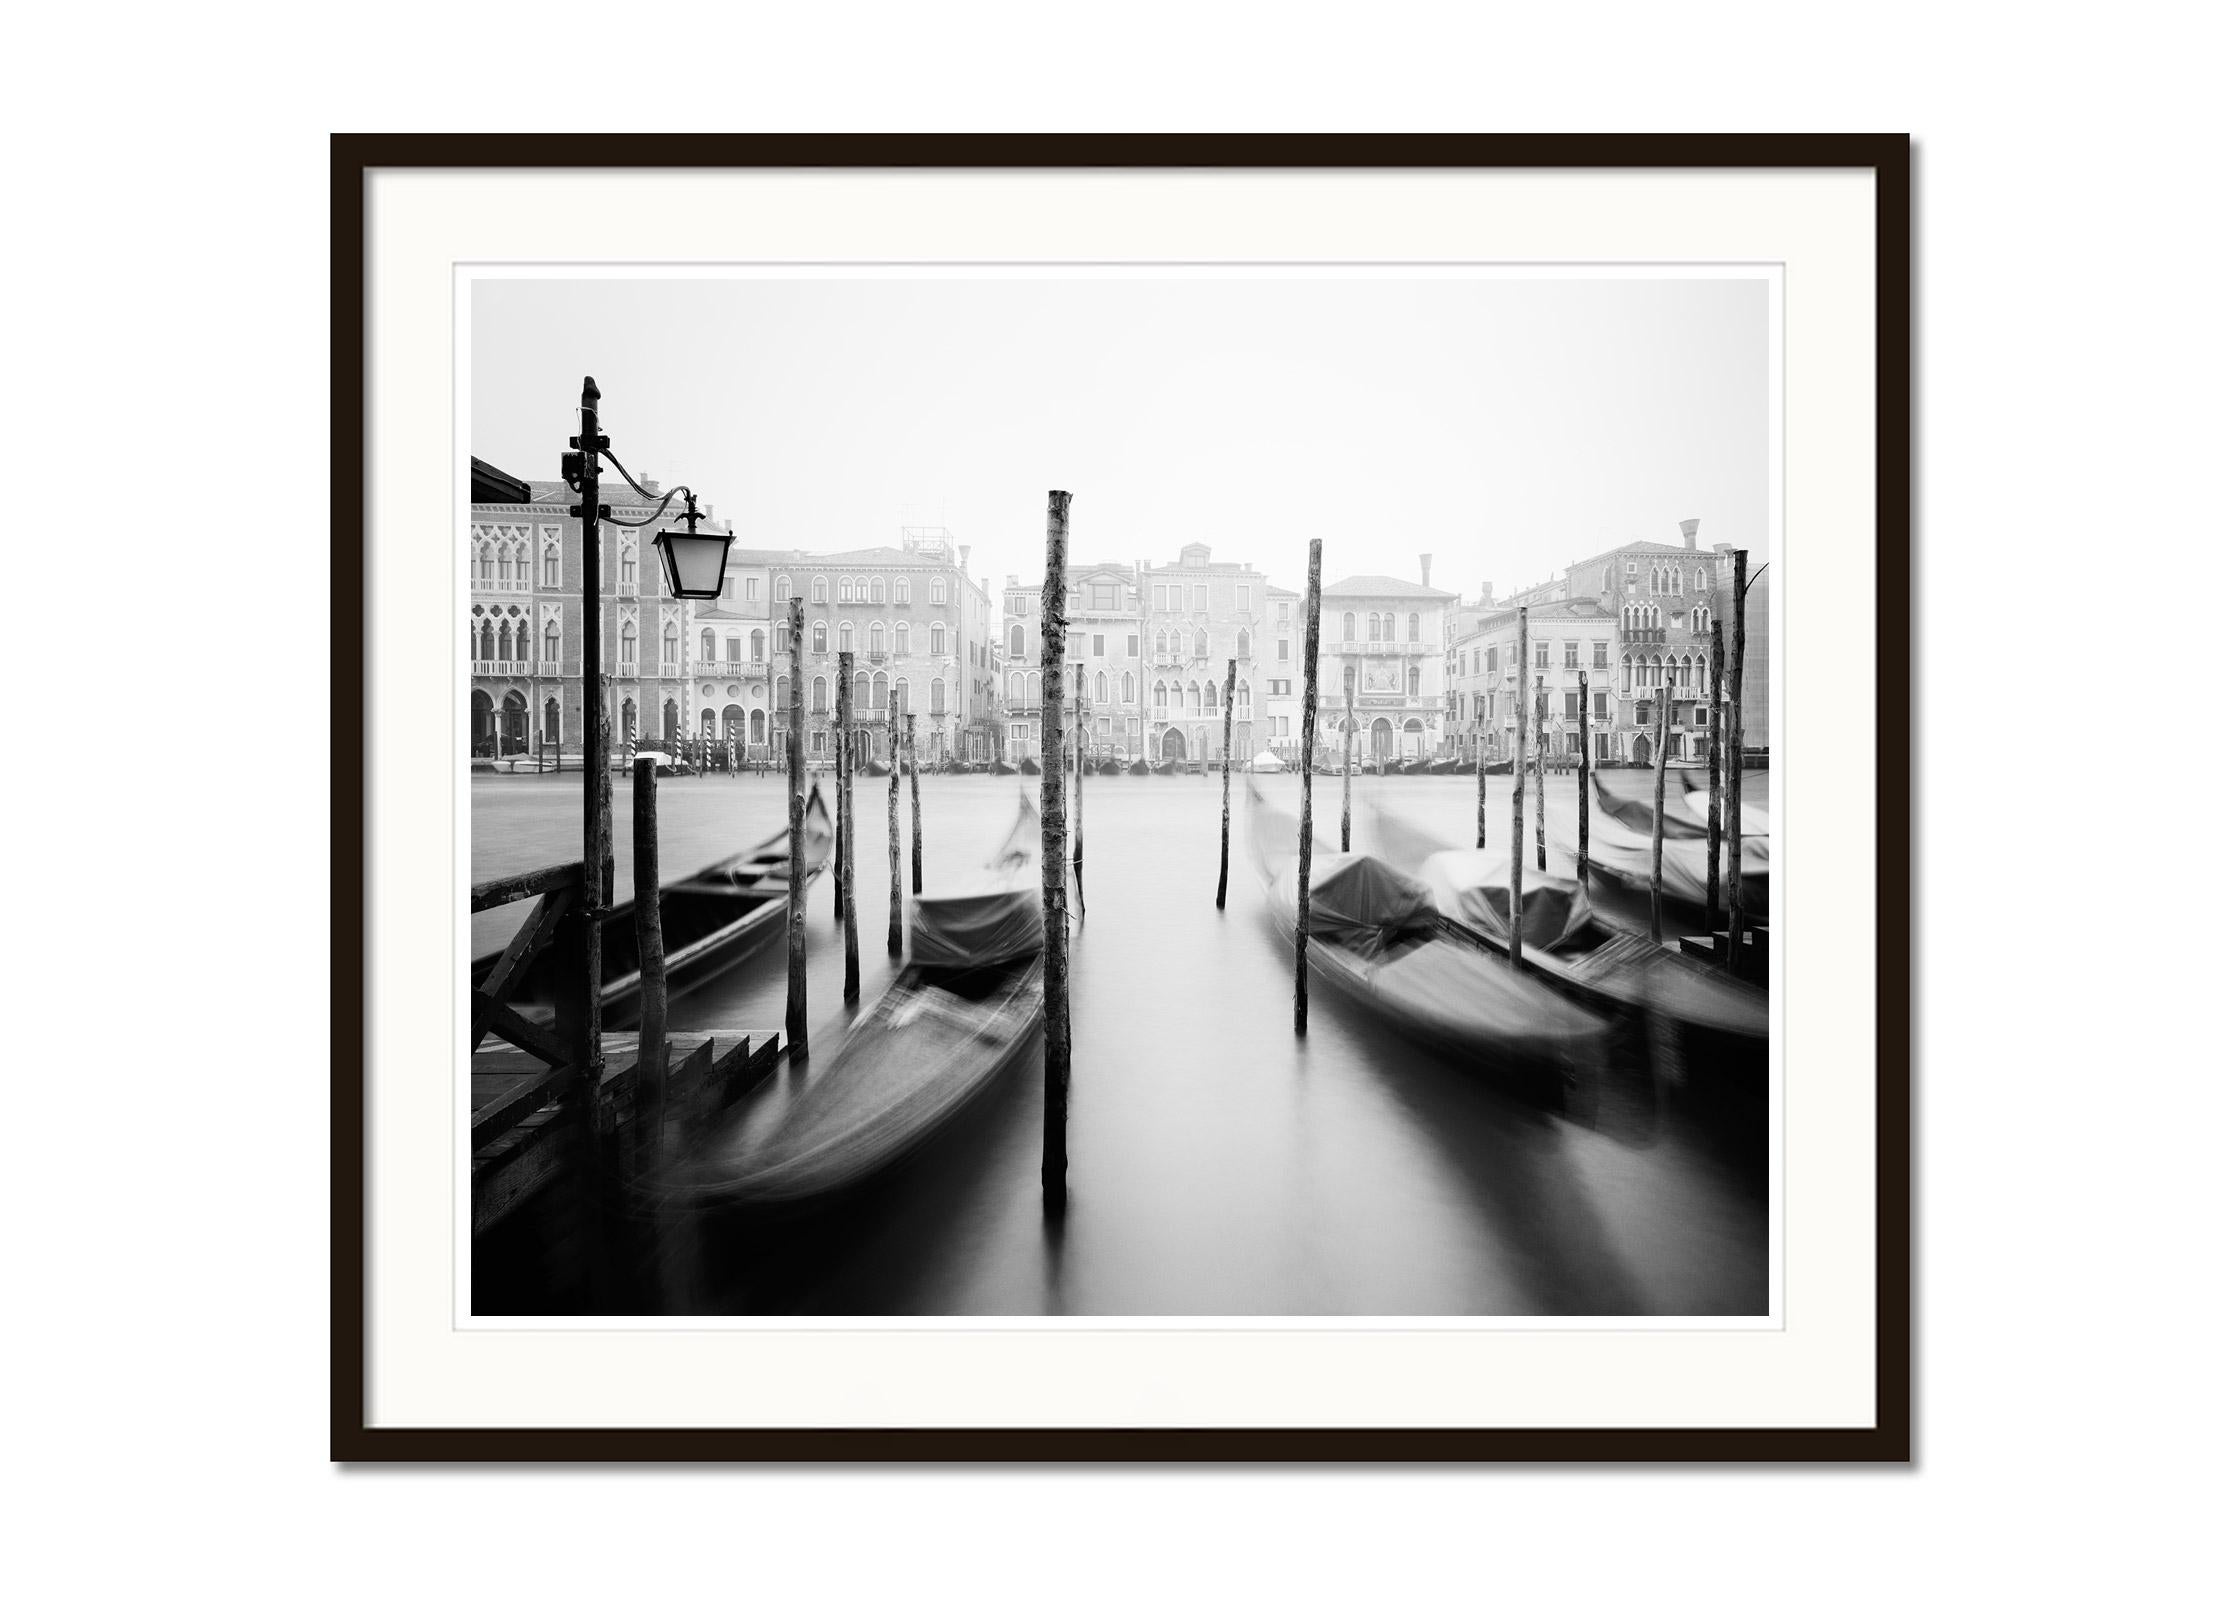 Black and white fine art long exposure cityscape - landscape photography. Gondola on the Canal Grande at sunrise Venice, Italy. Archival pigment ink print, edition of 7. Signed, titled, dated and numbered by artist. Certificate of authenticity